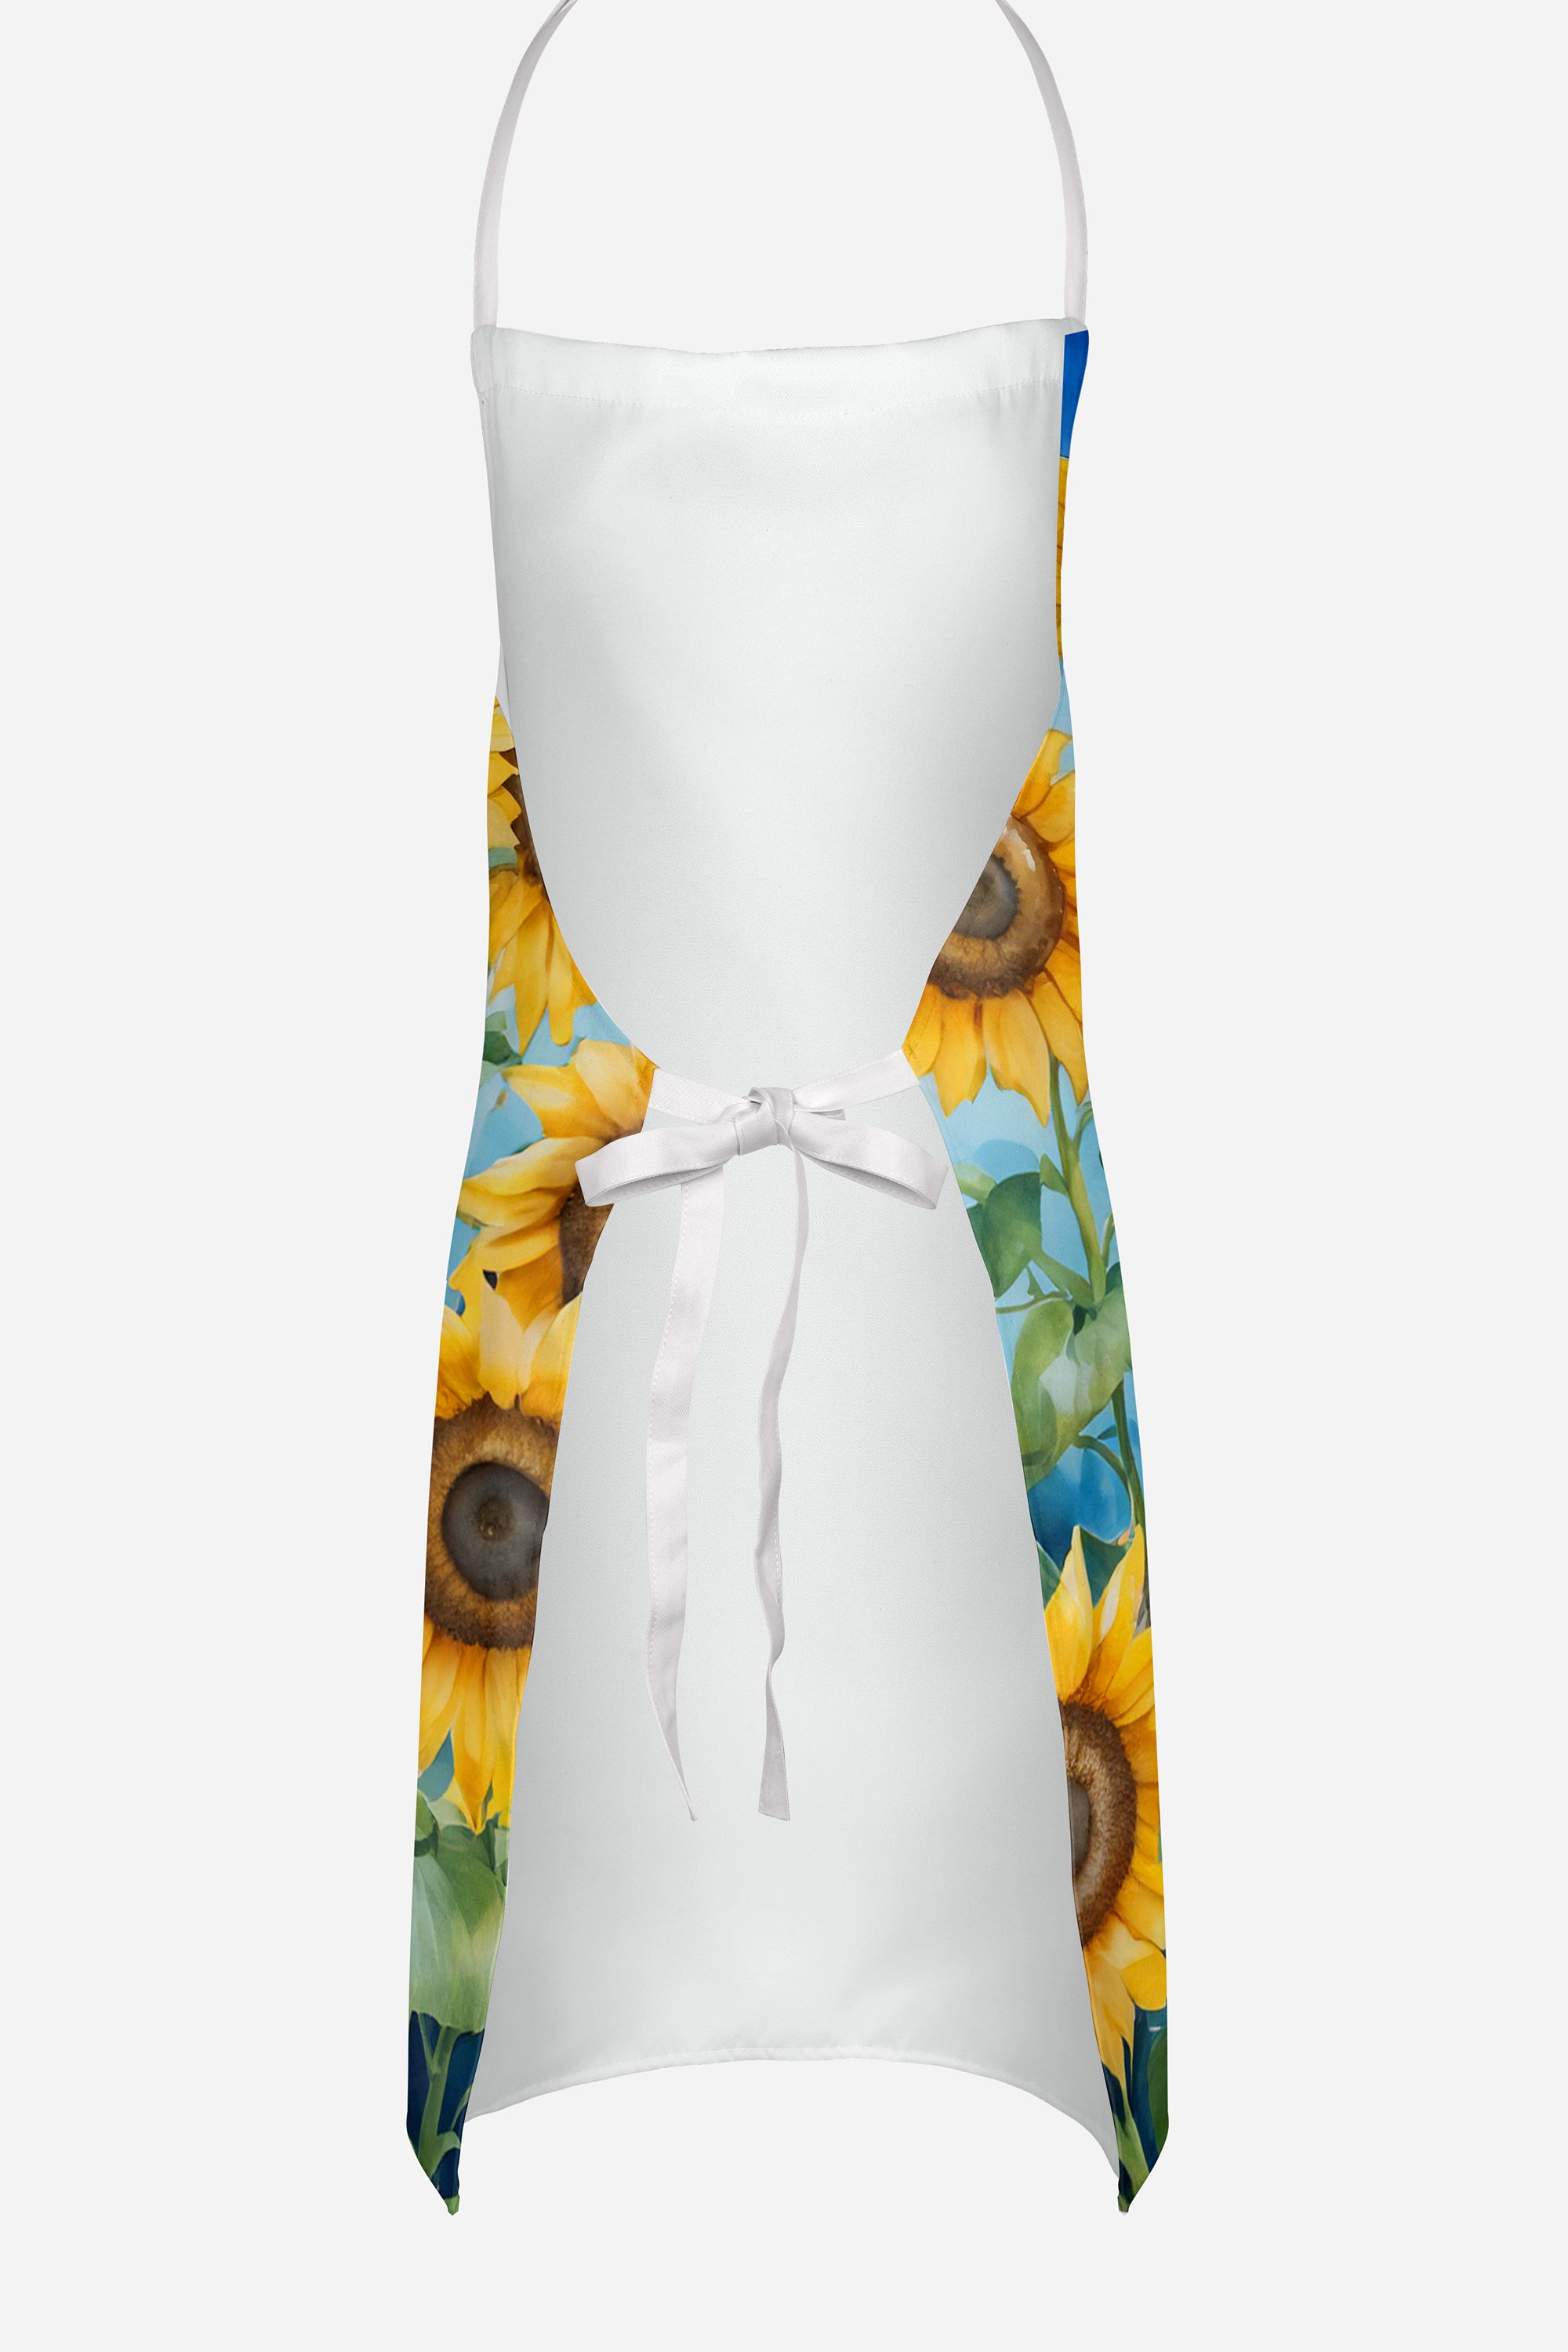 Afghan Hound in Sunflowers Apron